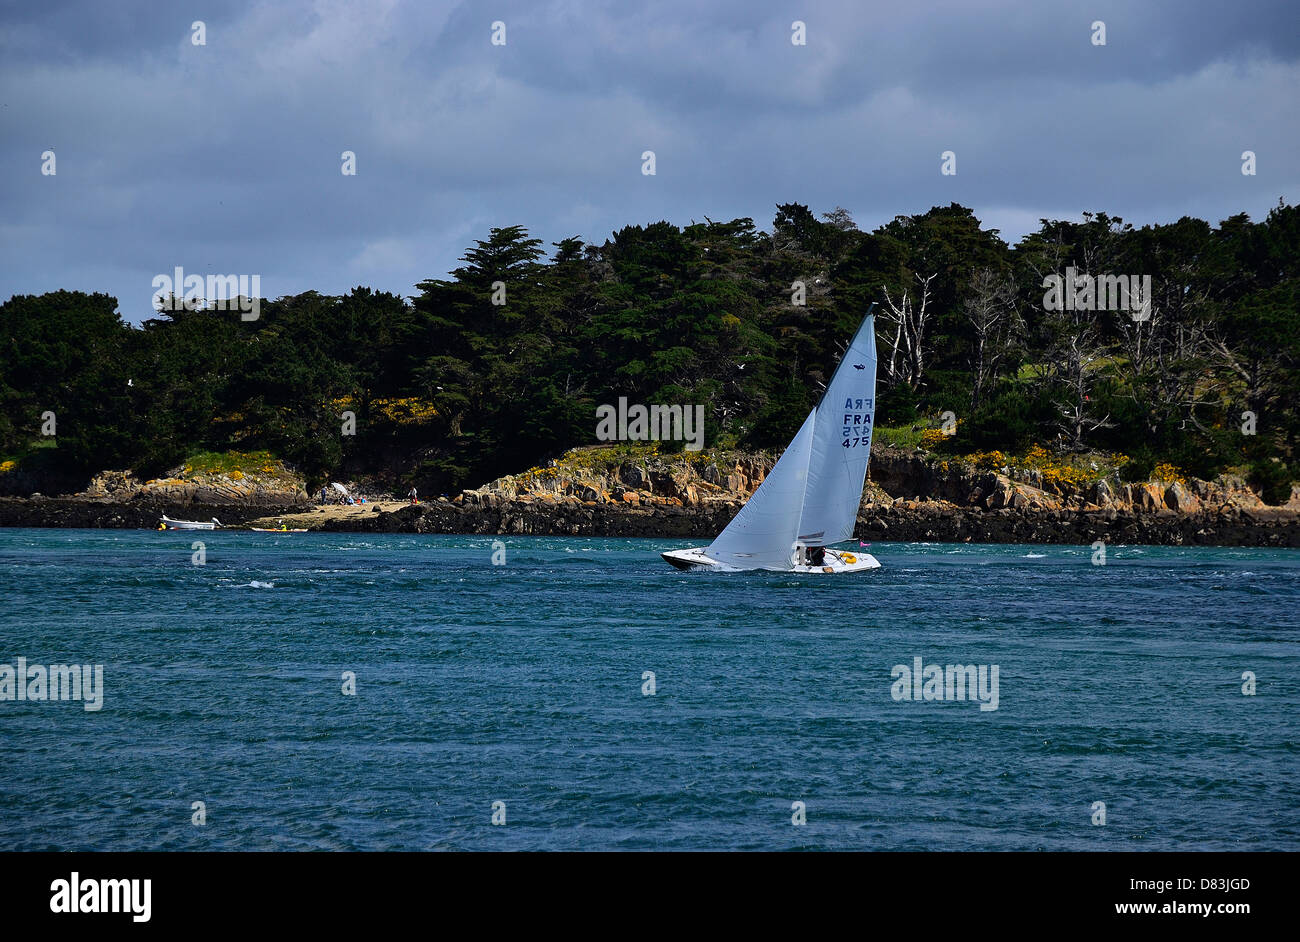 Classic yahct (shark) sailing in front of Ile Longue in Morbihan gulf, during maritime event 'Semaine du golfe'. Stock Photo